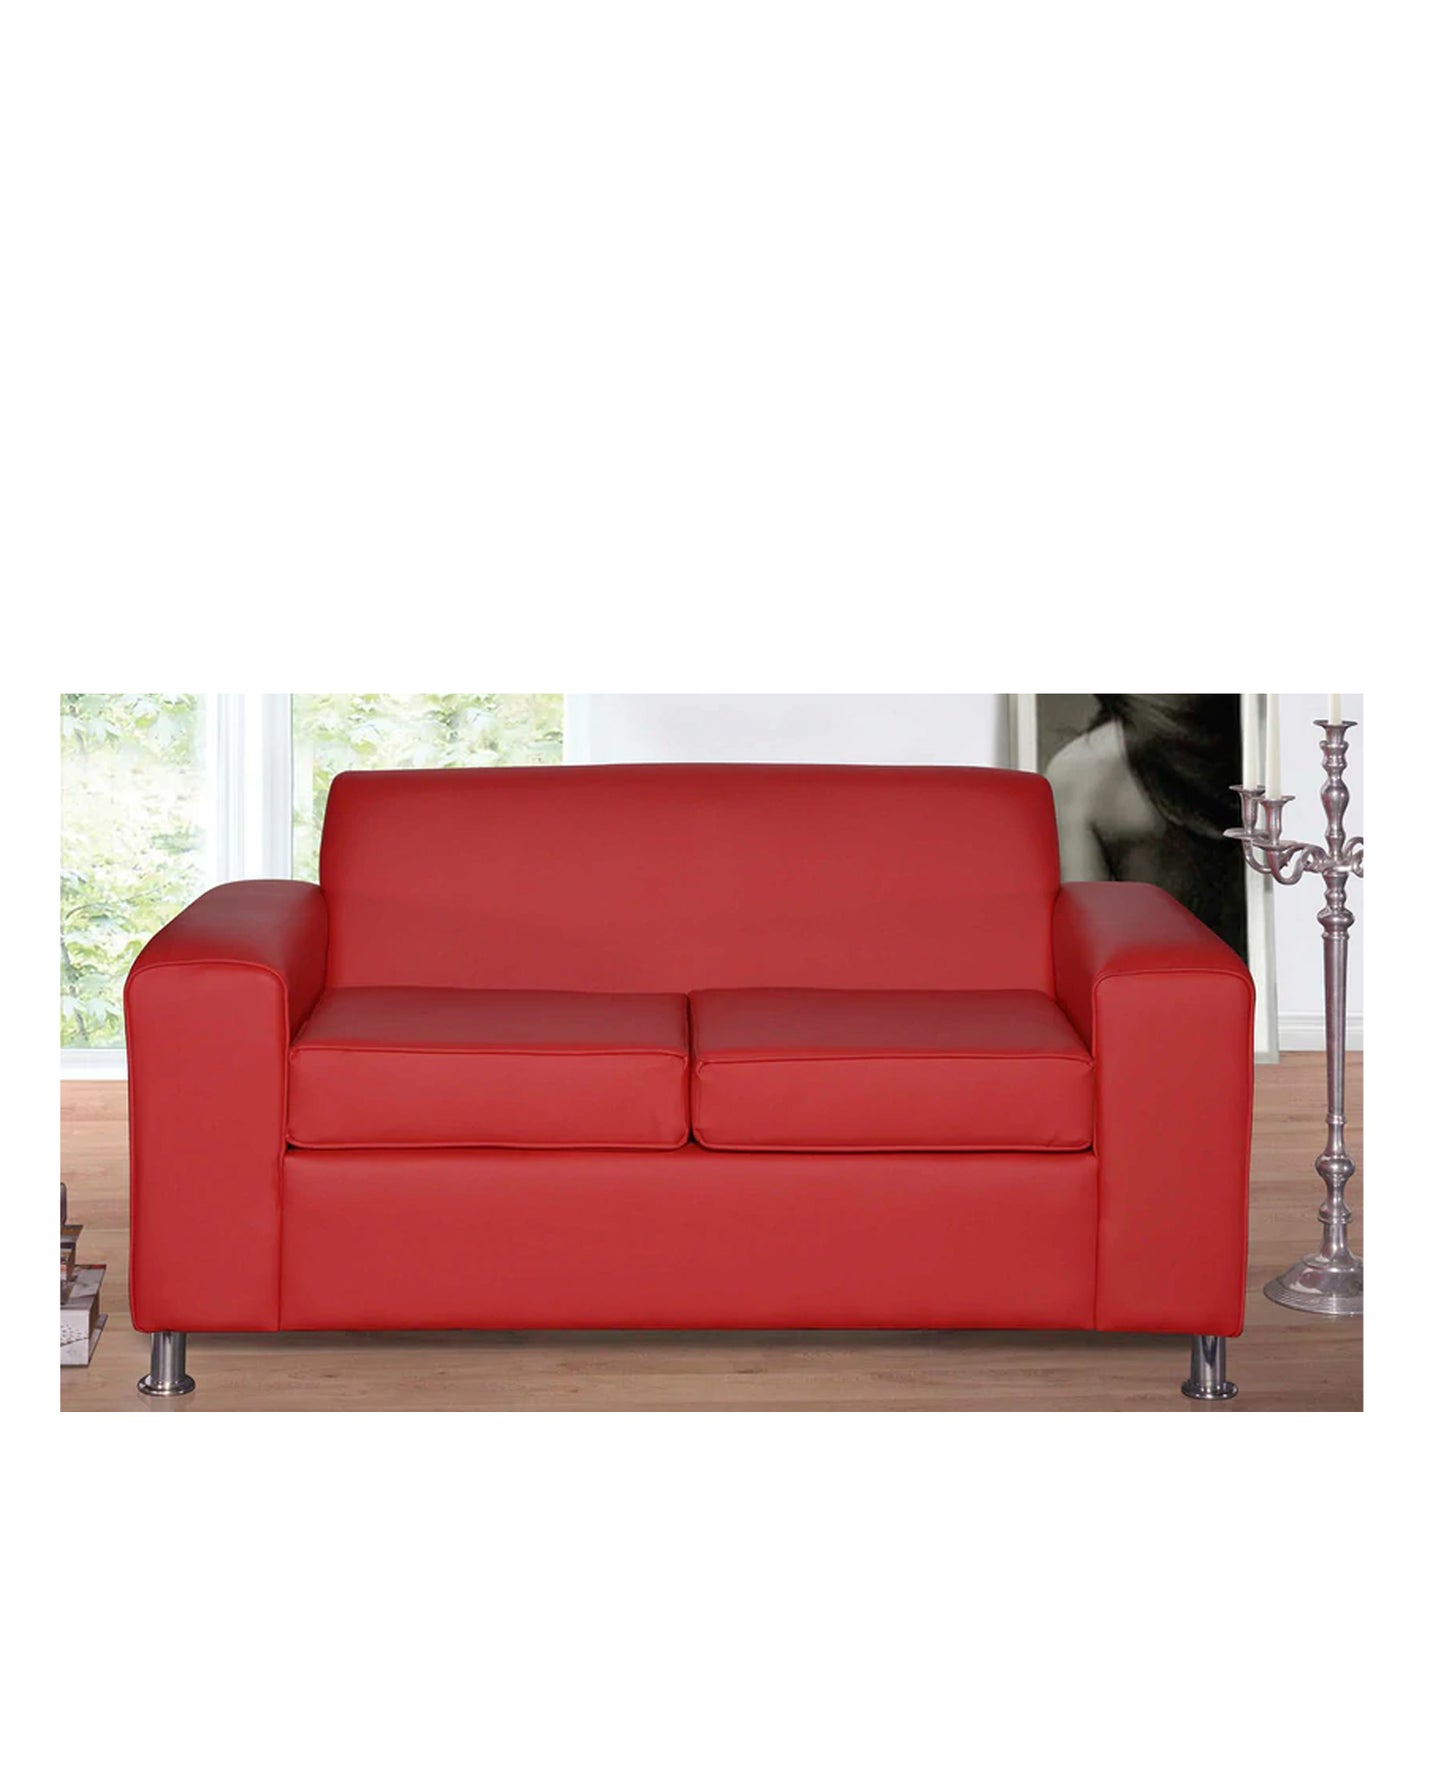 Lola 2 Division Red Couch